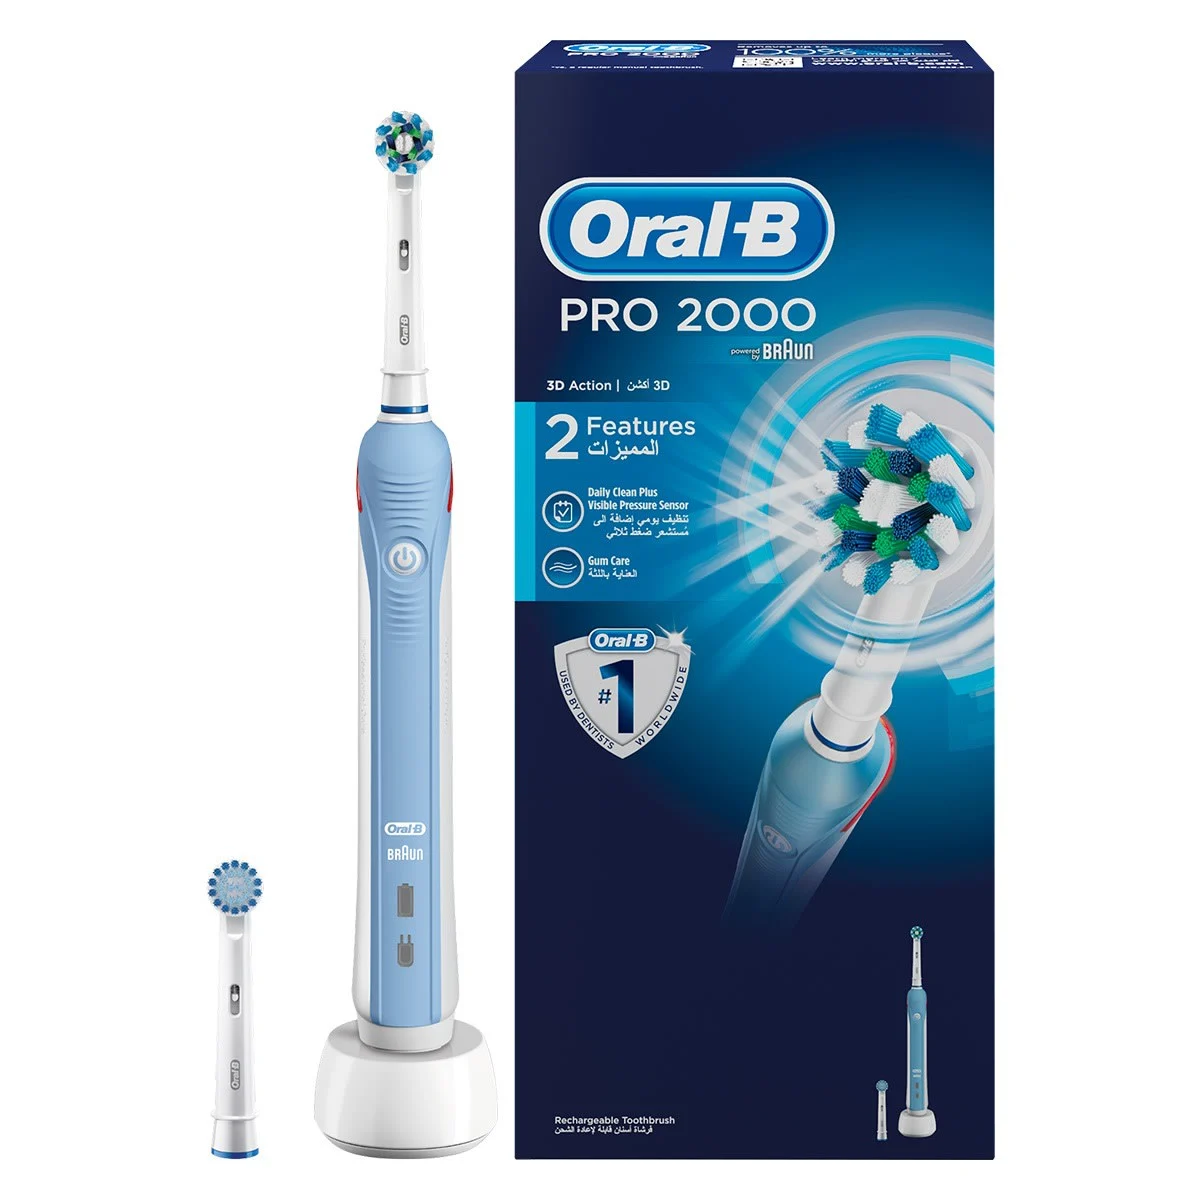 Oral-B Pro 2000 Electric Toothbrush Powered by Braun undefined